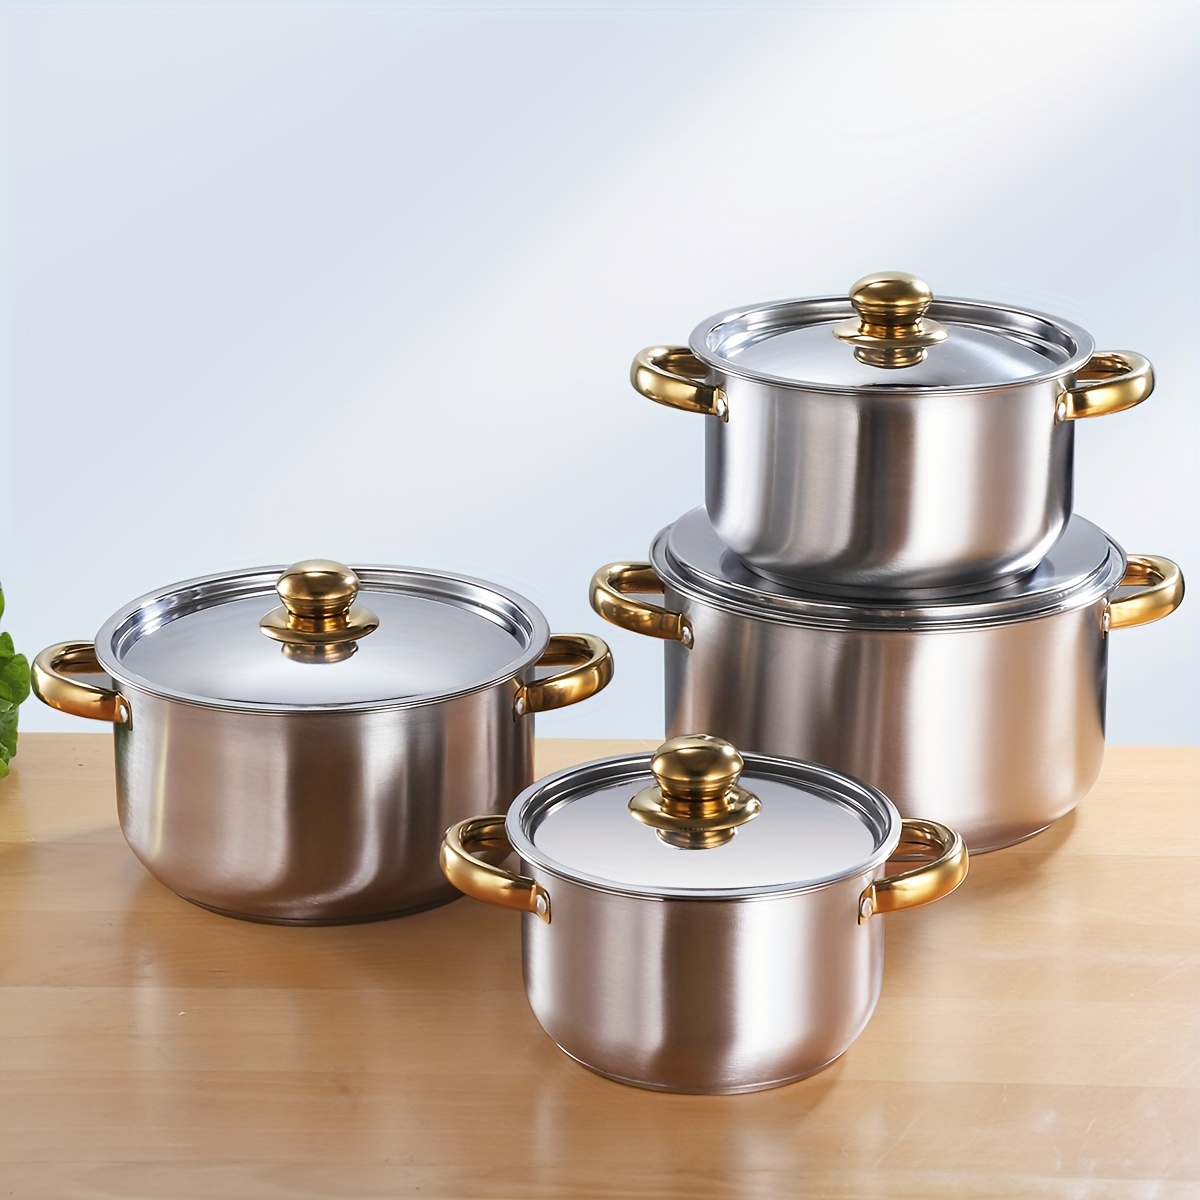 

Stainless Steel Cookware Set 4-piece With Lids, Durable 410 Stainless Steel Soup Pots, Thickened Composite Bottom, Kitchen Essentials - 18cm, 20cm, 22cm, 24cm Sizes